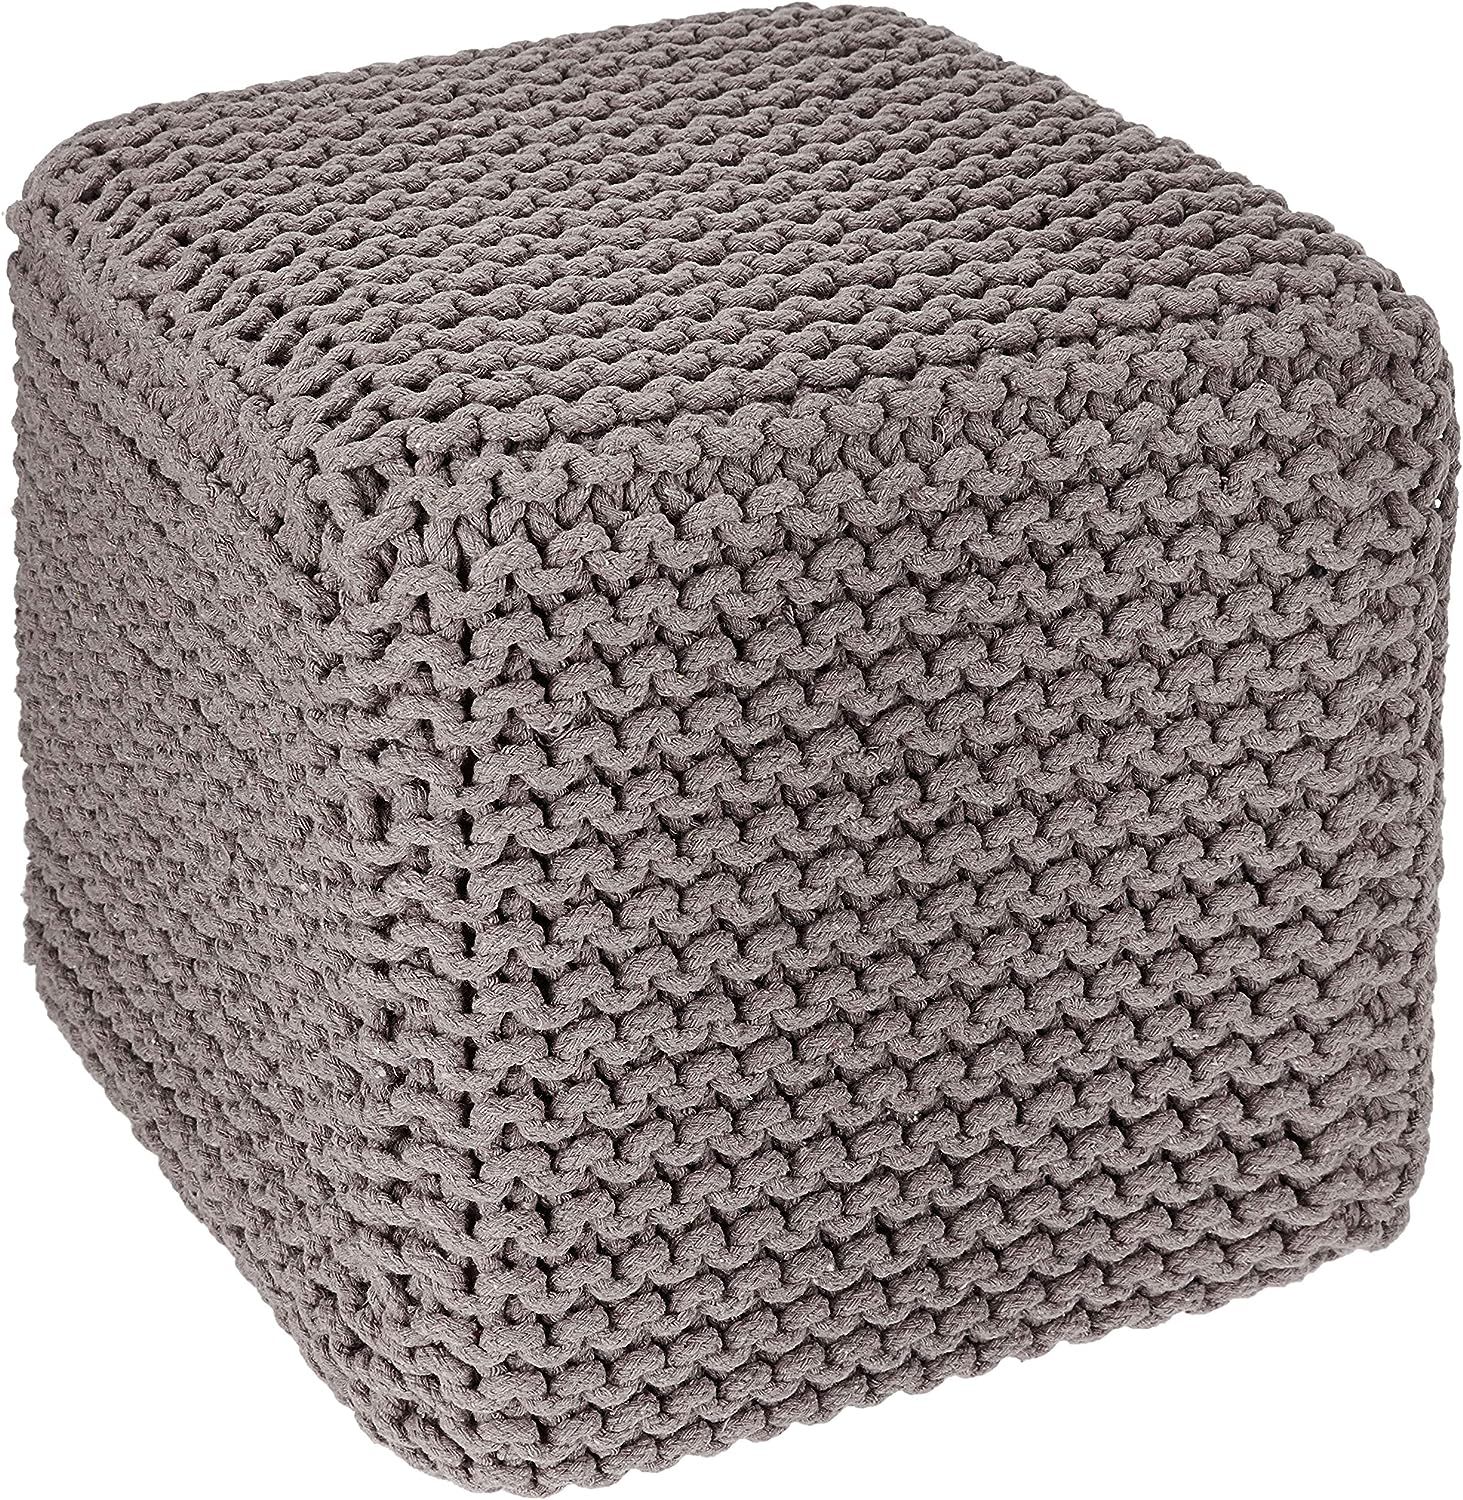 REDEARTH Cube Hand Knitted Pouf -Foot Stool Ottoman, Cord Boho Pouffe, Poof Accent Filled Ready t... | Amazon (US)